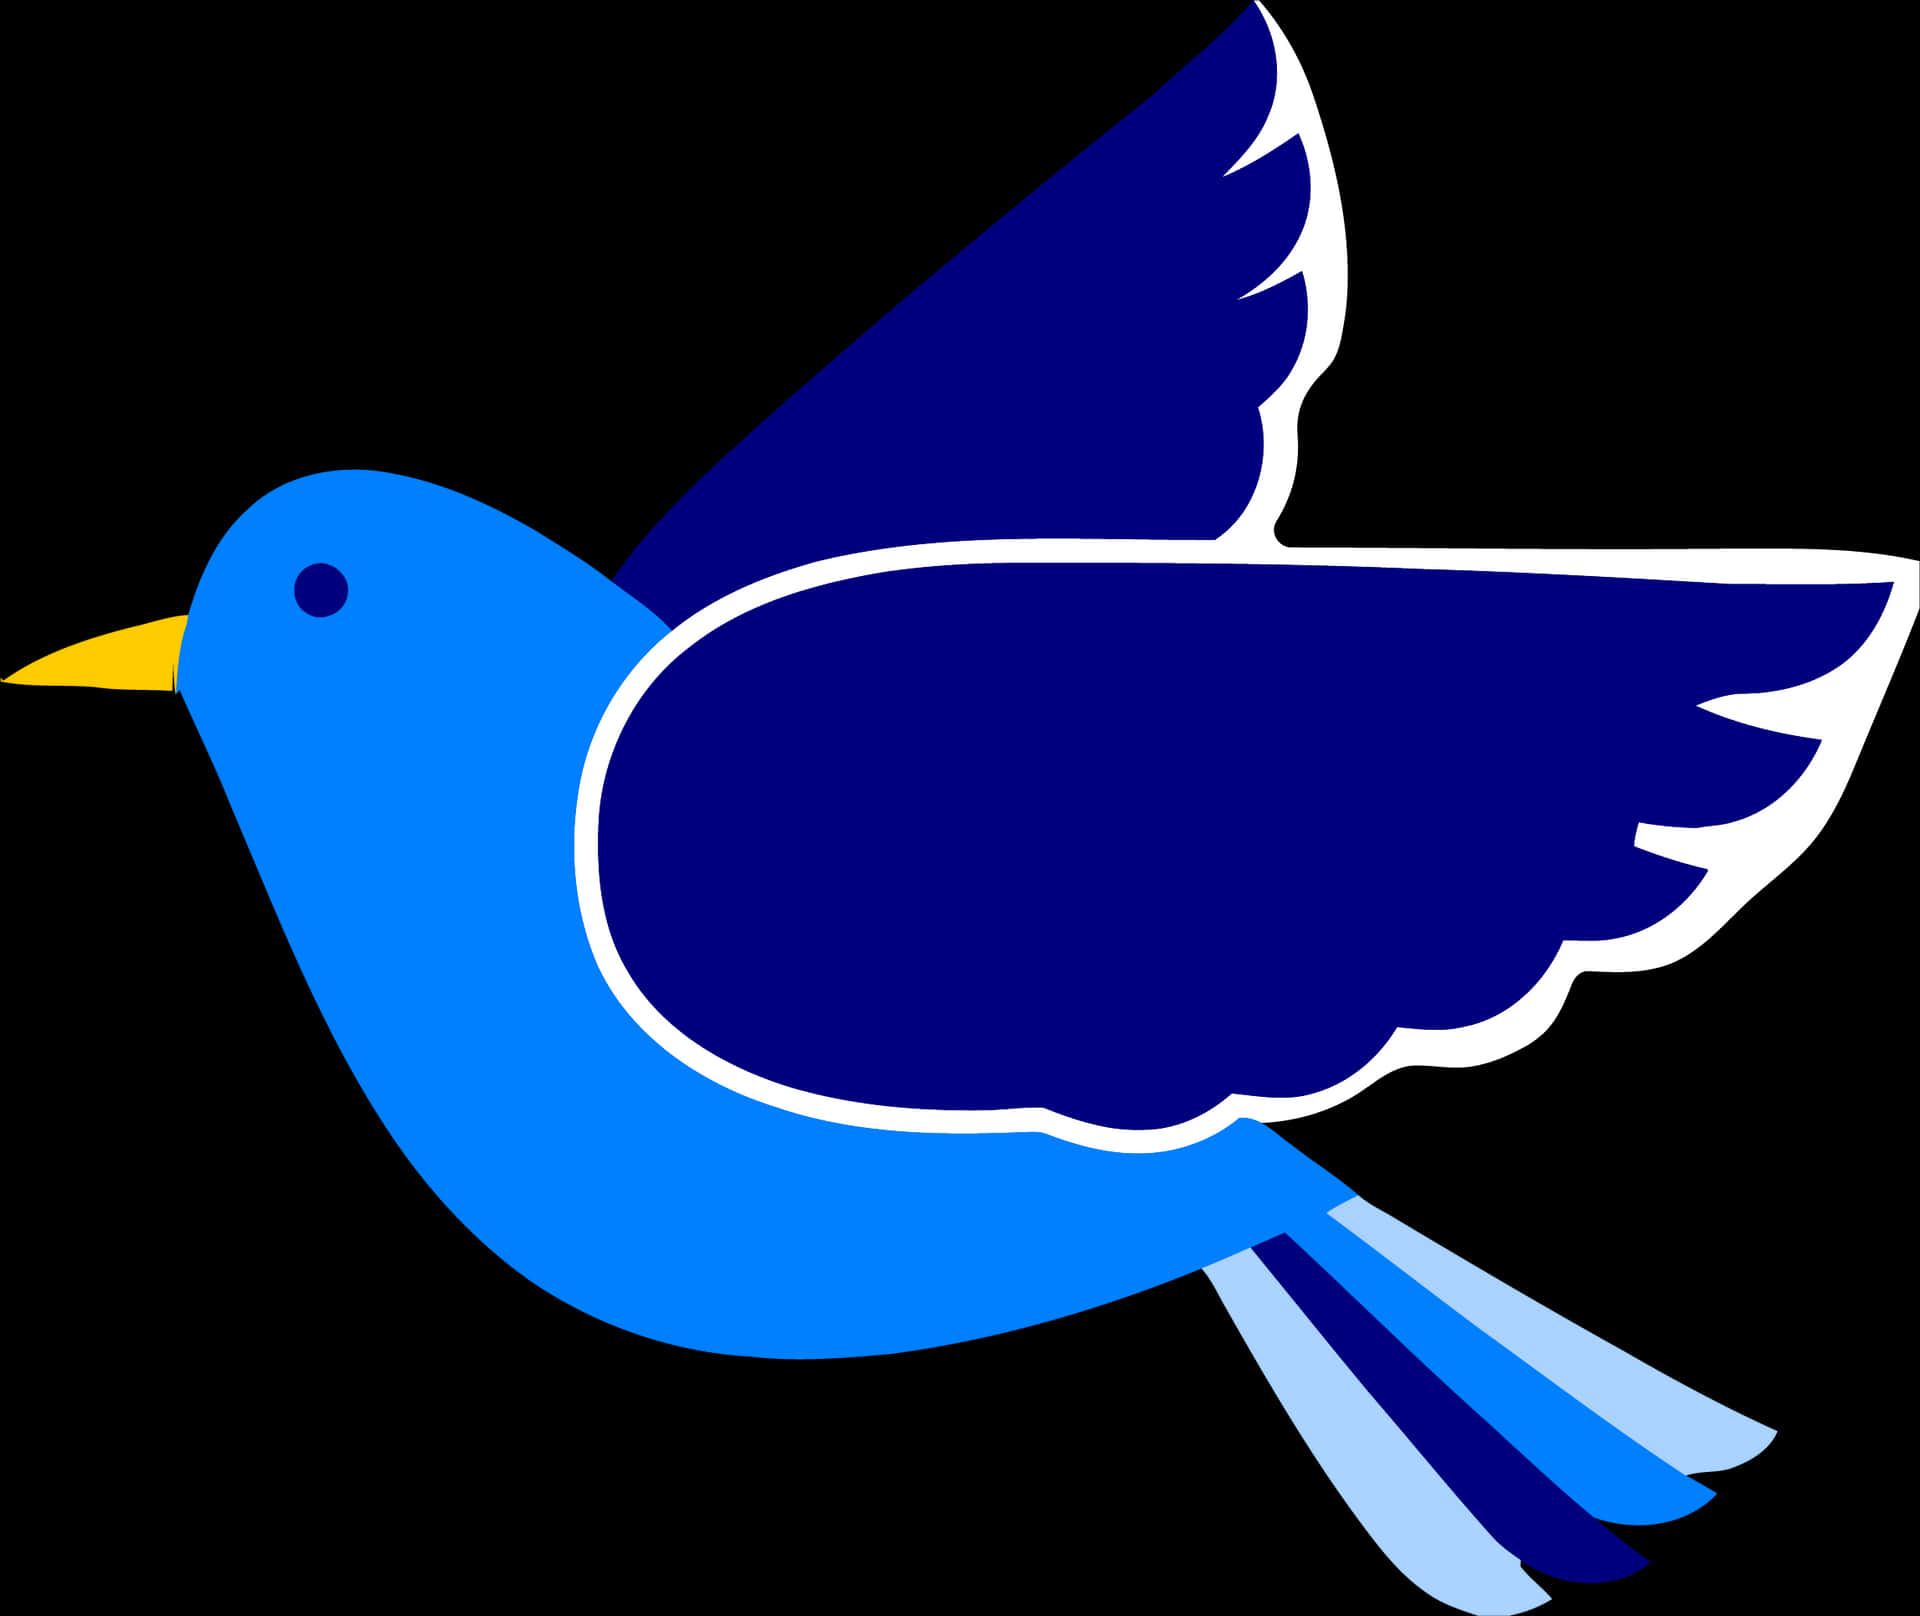 Blue_ Bird_ Graphic PNG